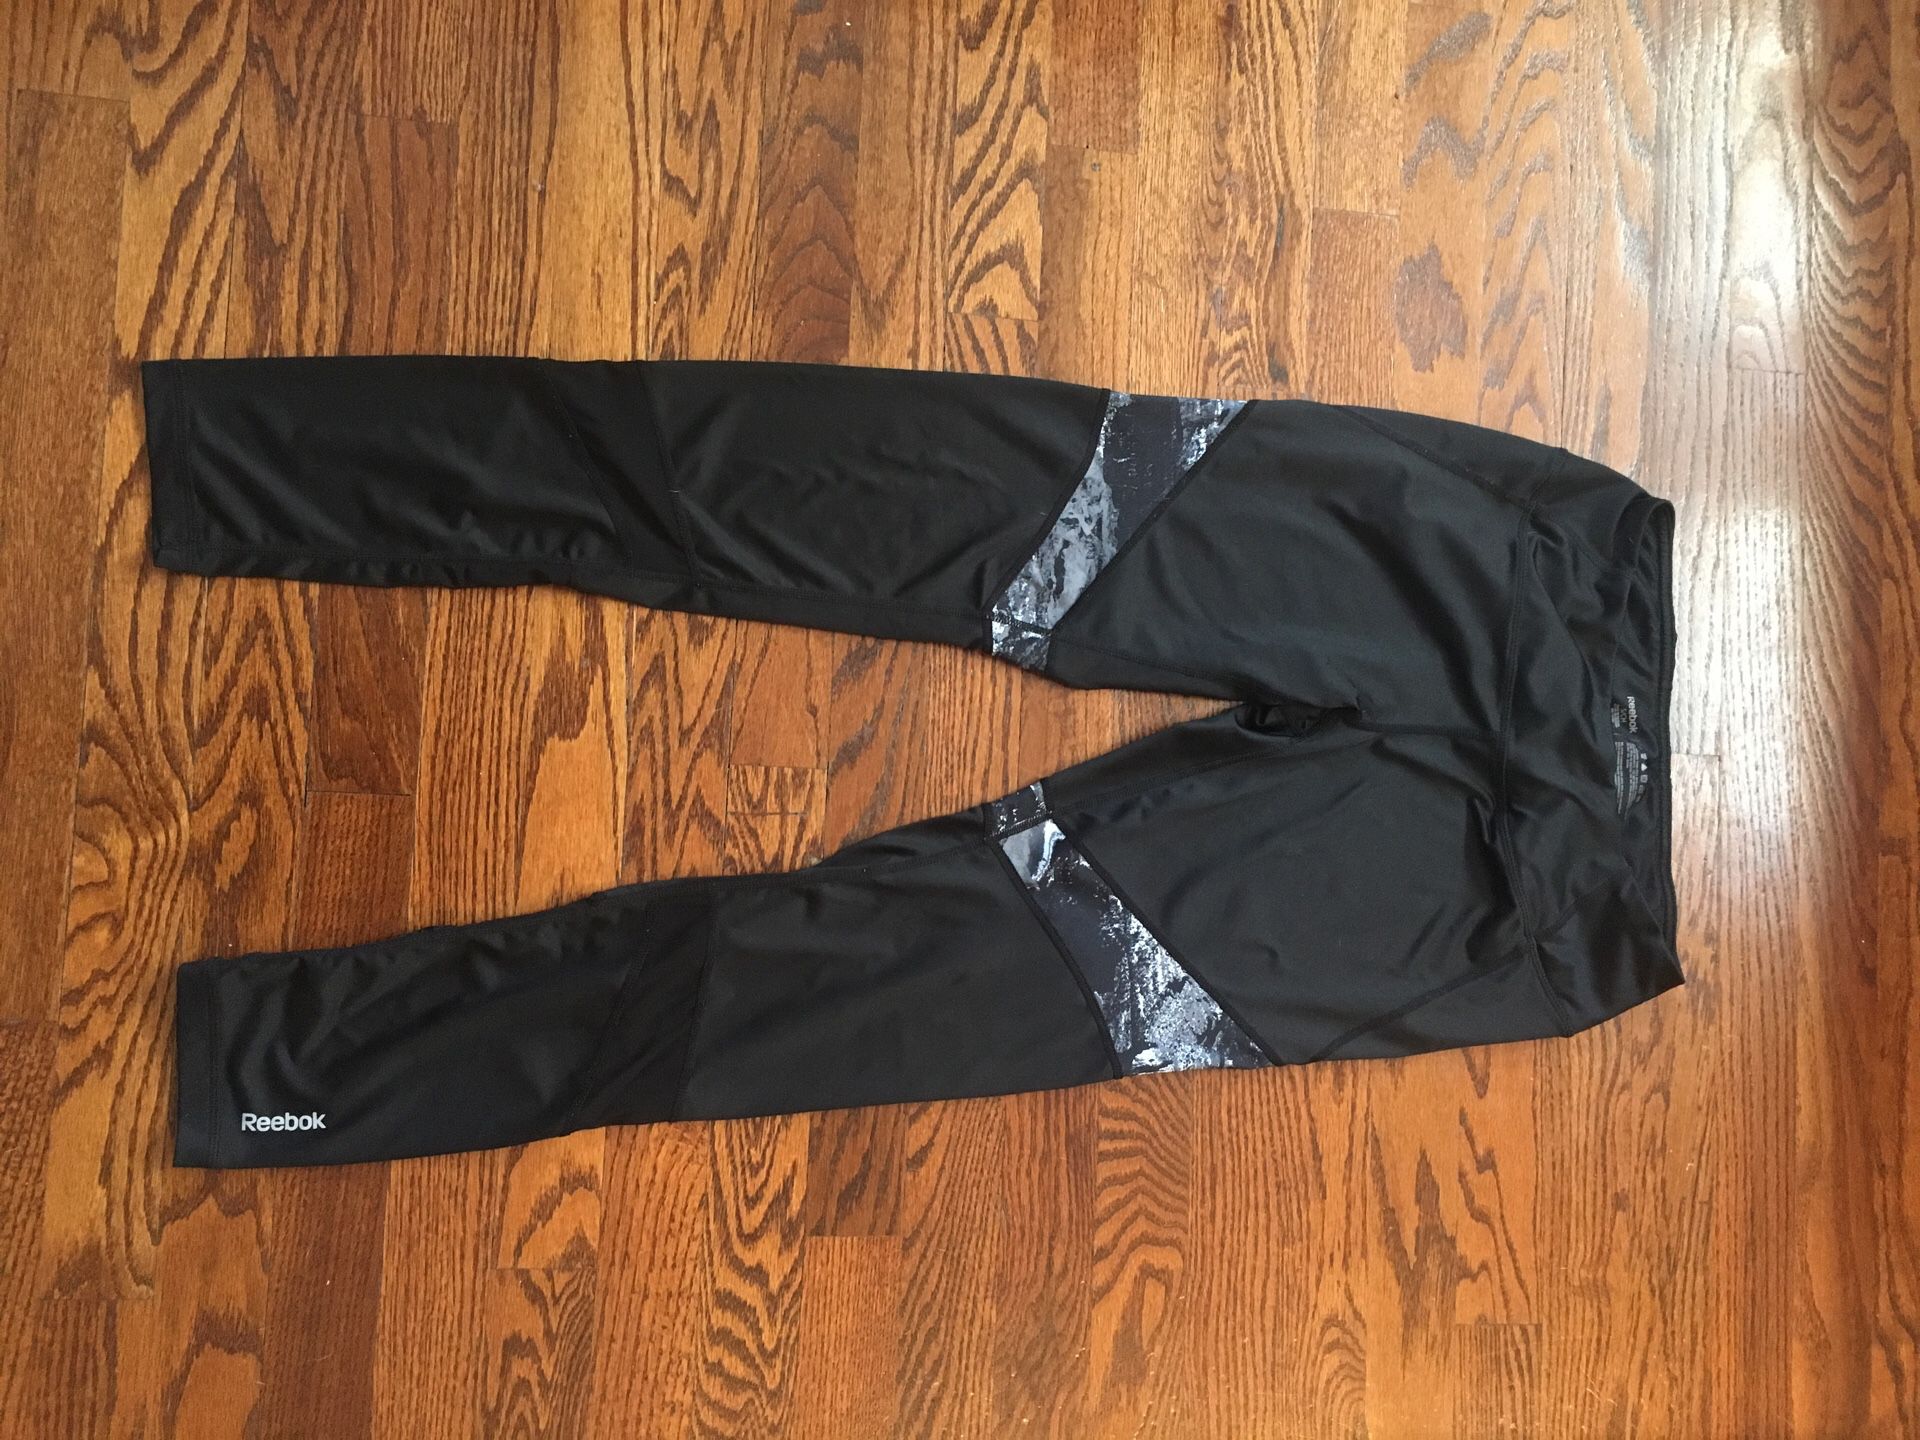 Reebok leggings, size small, used in good condition